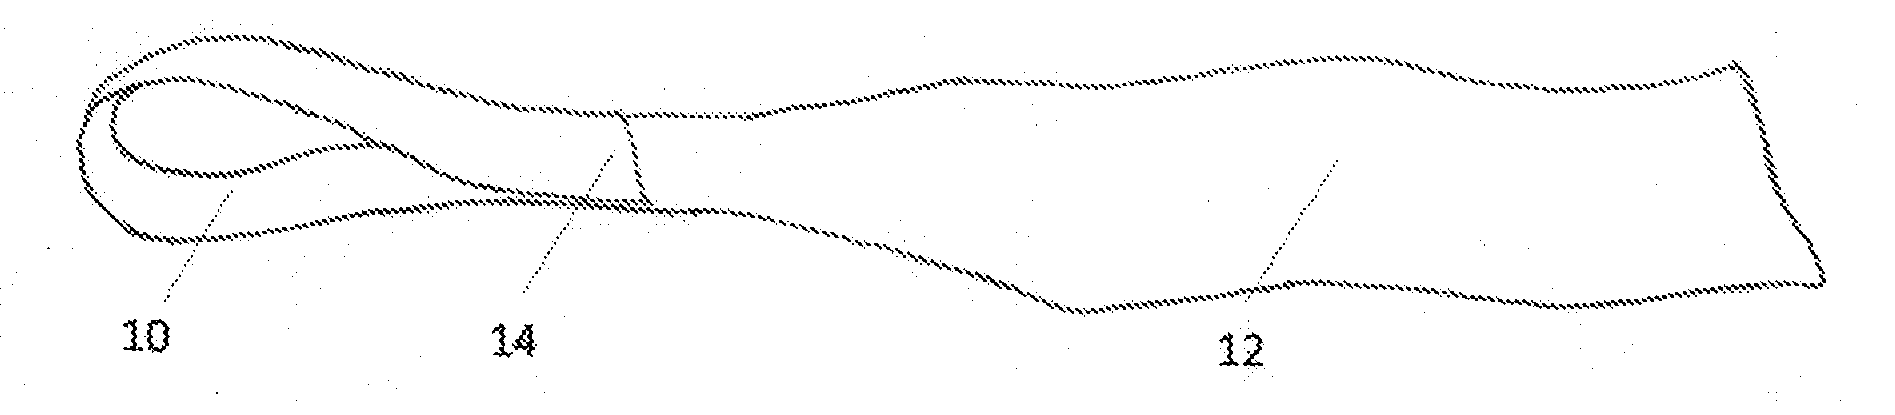 Exercise device including an inelastic sling strap